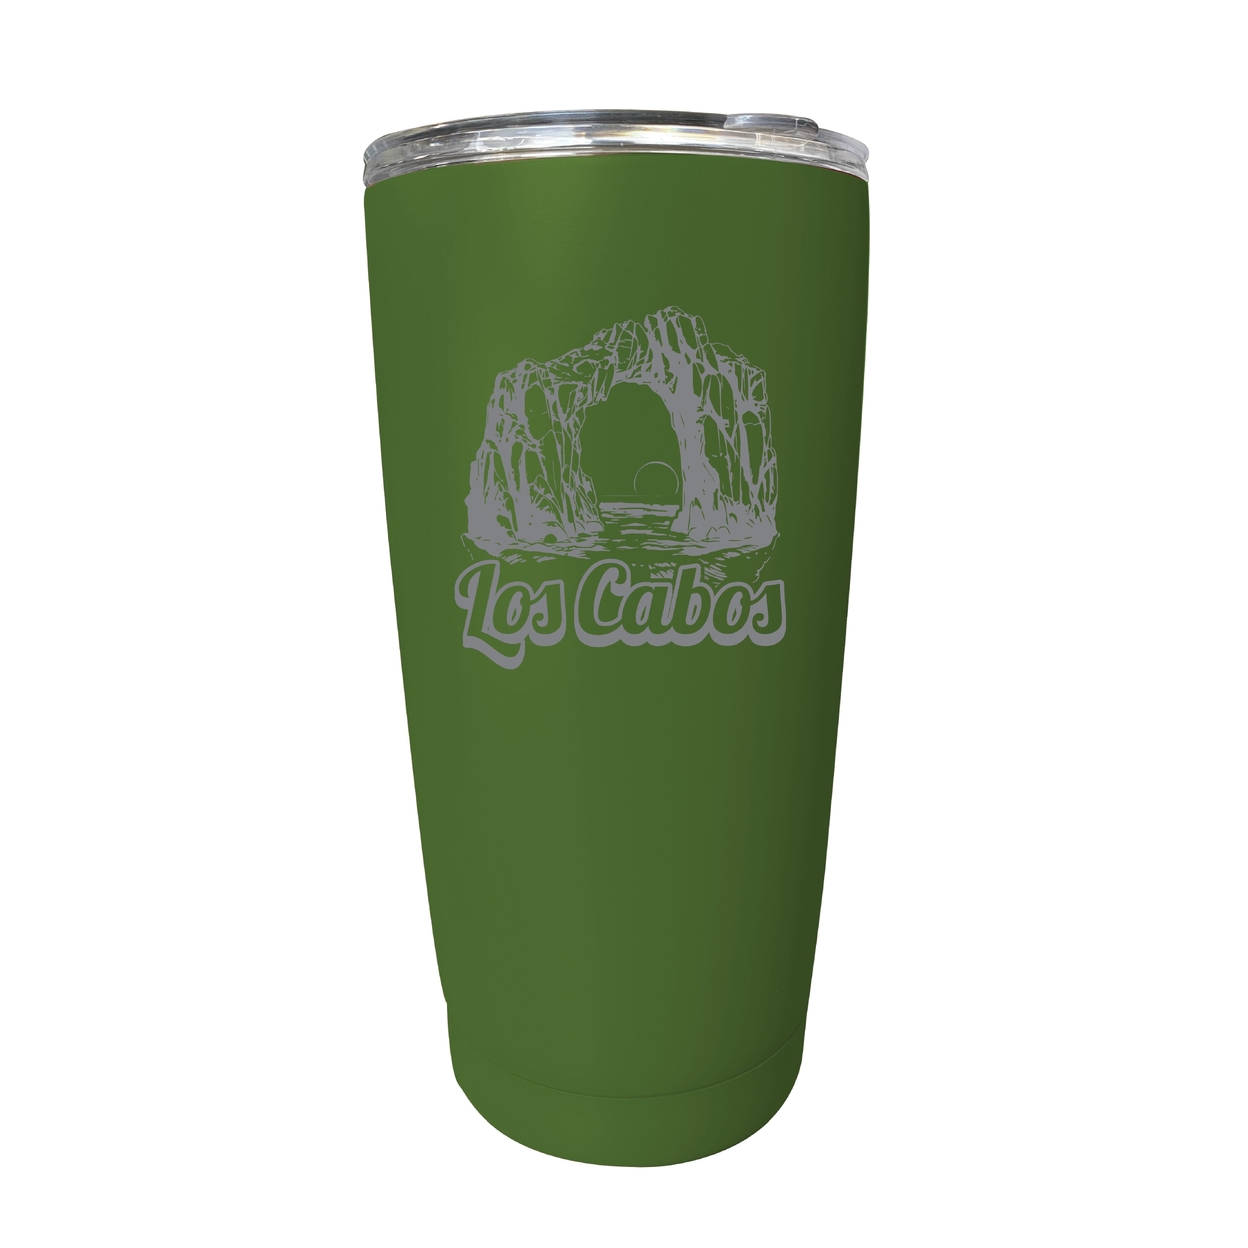 Los Cabos Mexico Souvenir 16 Oz Engraved Stainless Steel Insulated Tumbler - Green,,Single Unit